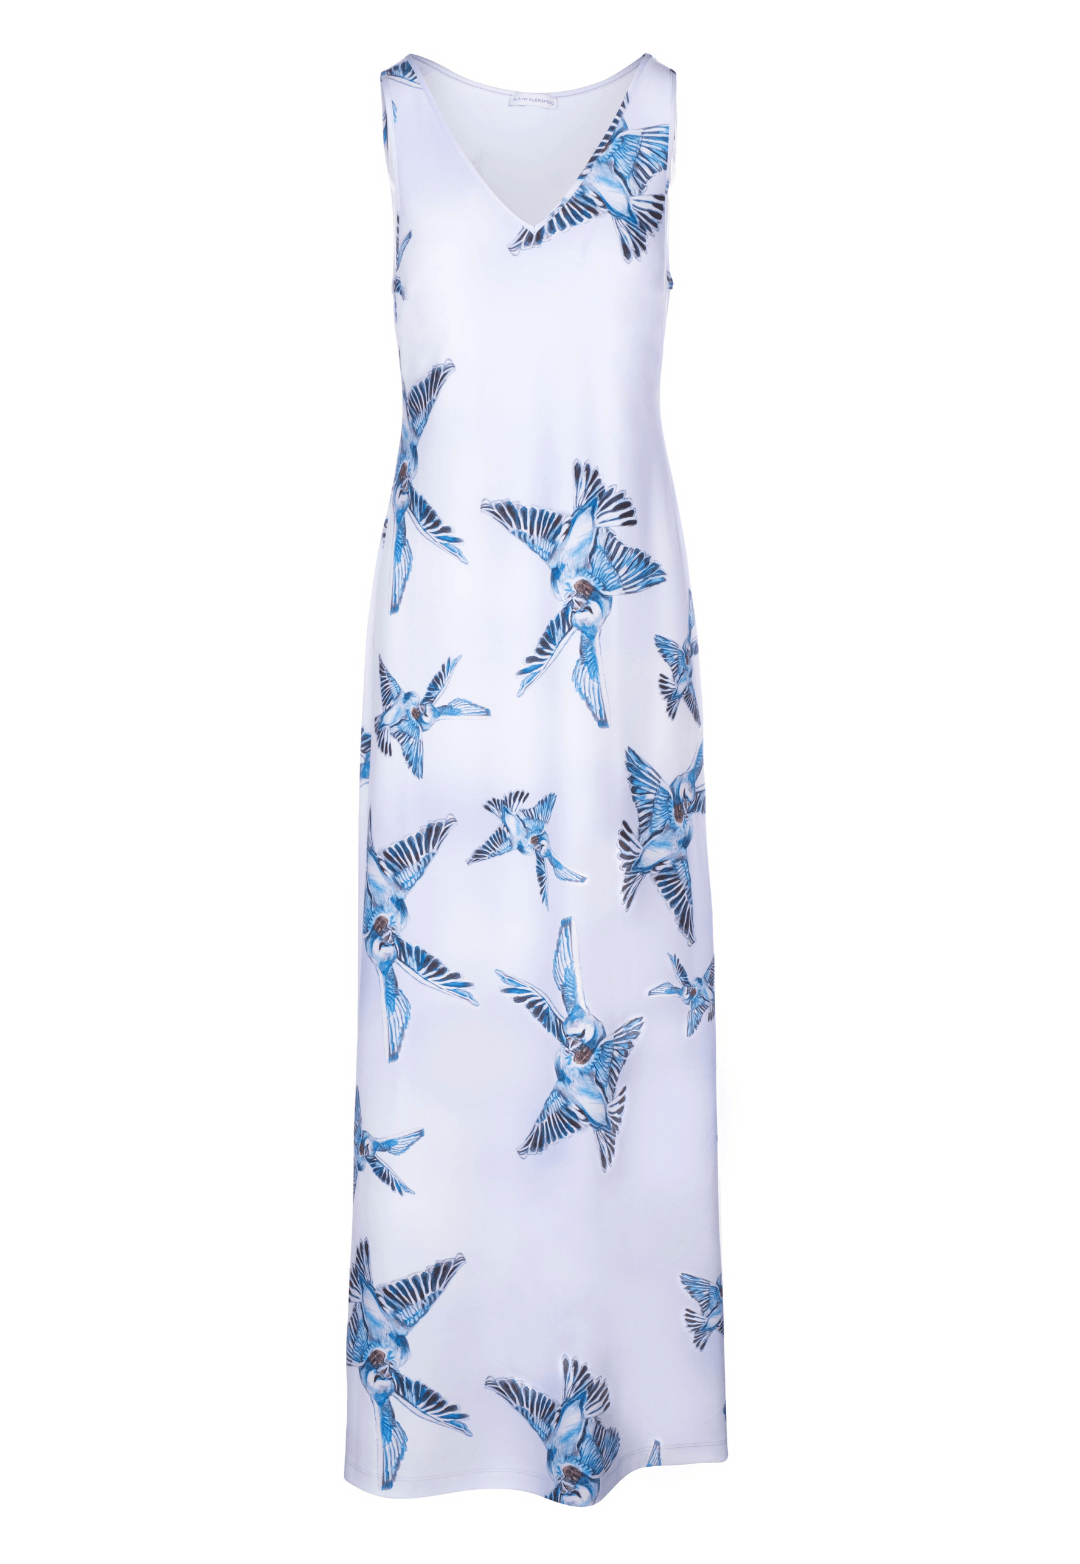 long stretch knit lavender dress with blue birds printed on it